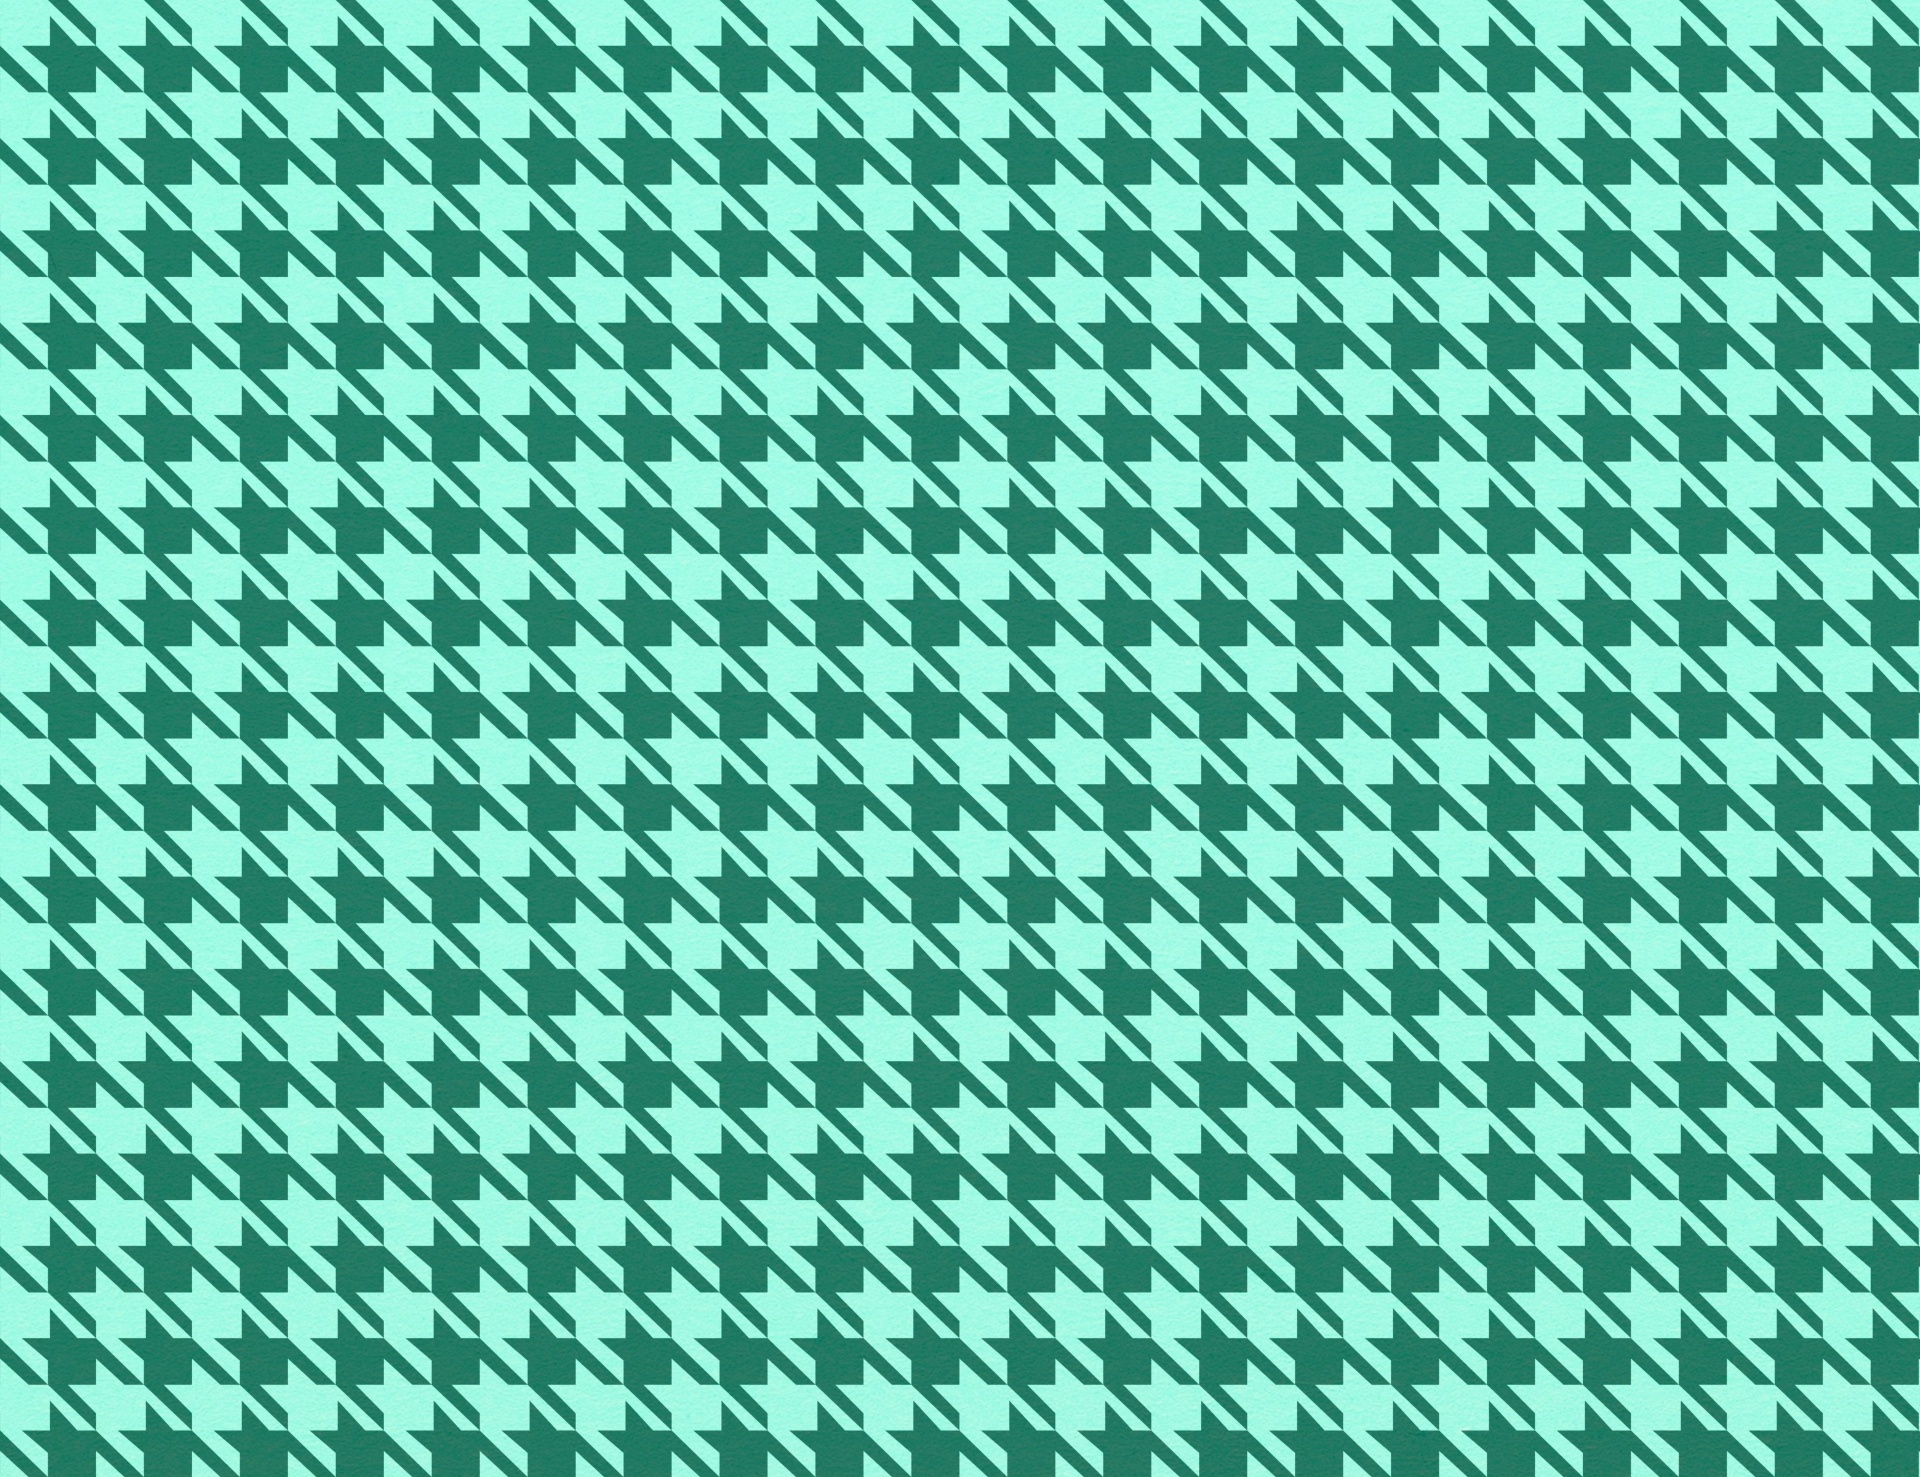 Houndstooth Pattern Turquoise Green